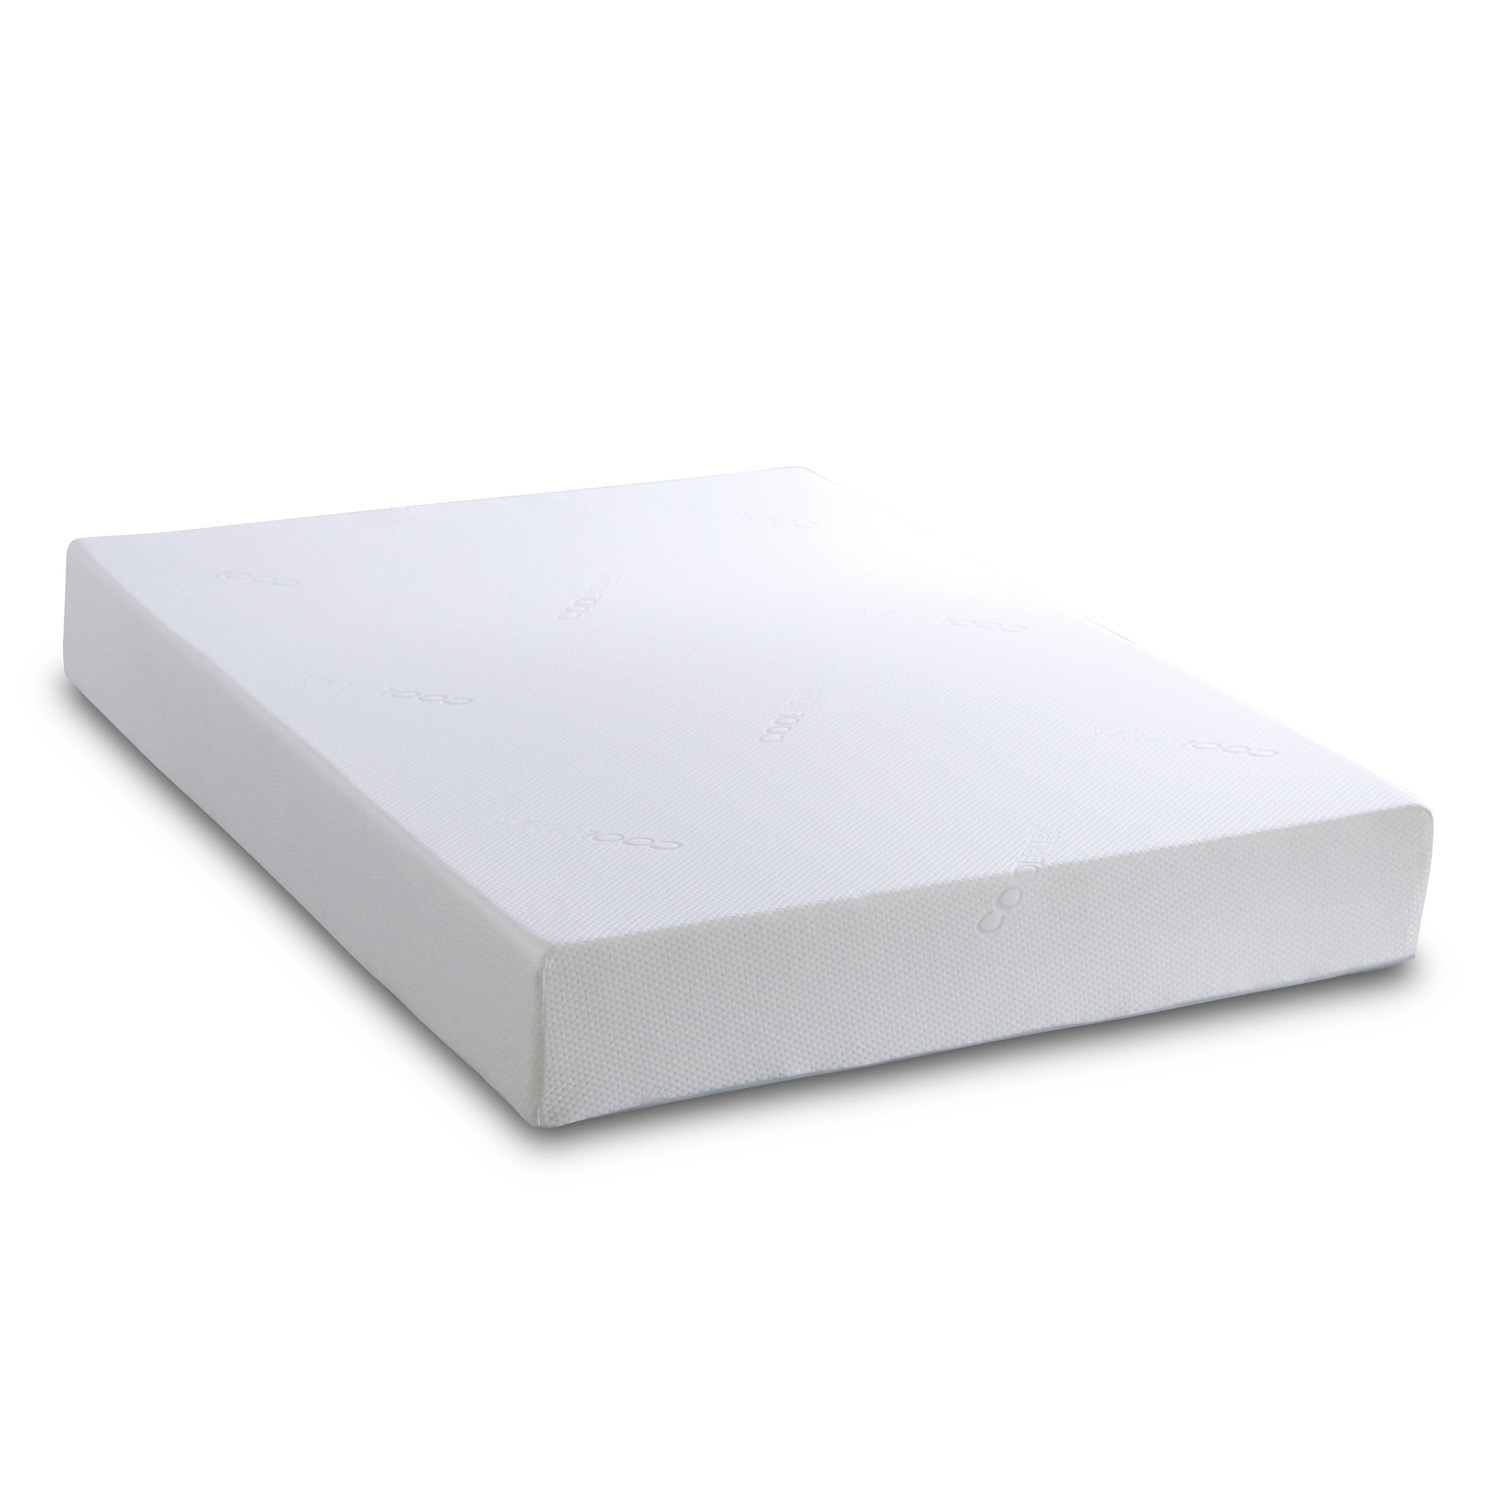 Read more about King size memory foam orthopaedic rolled mattress with removable cover visco therapy